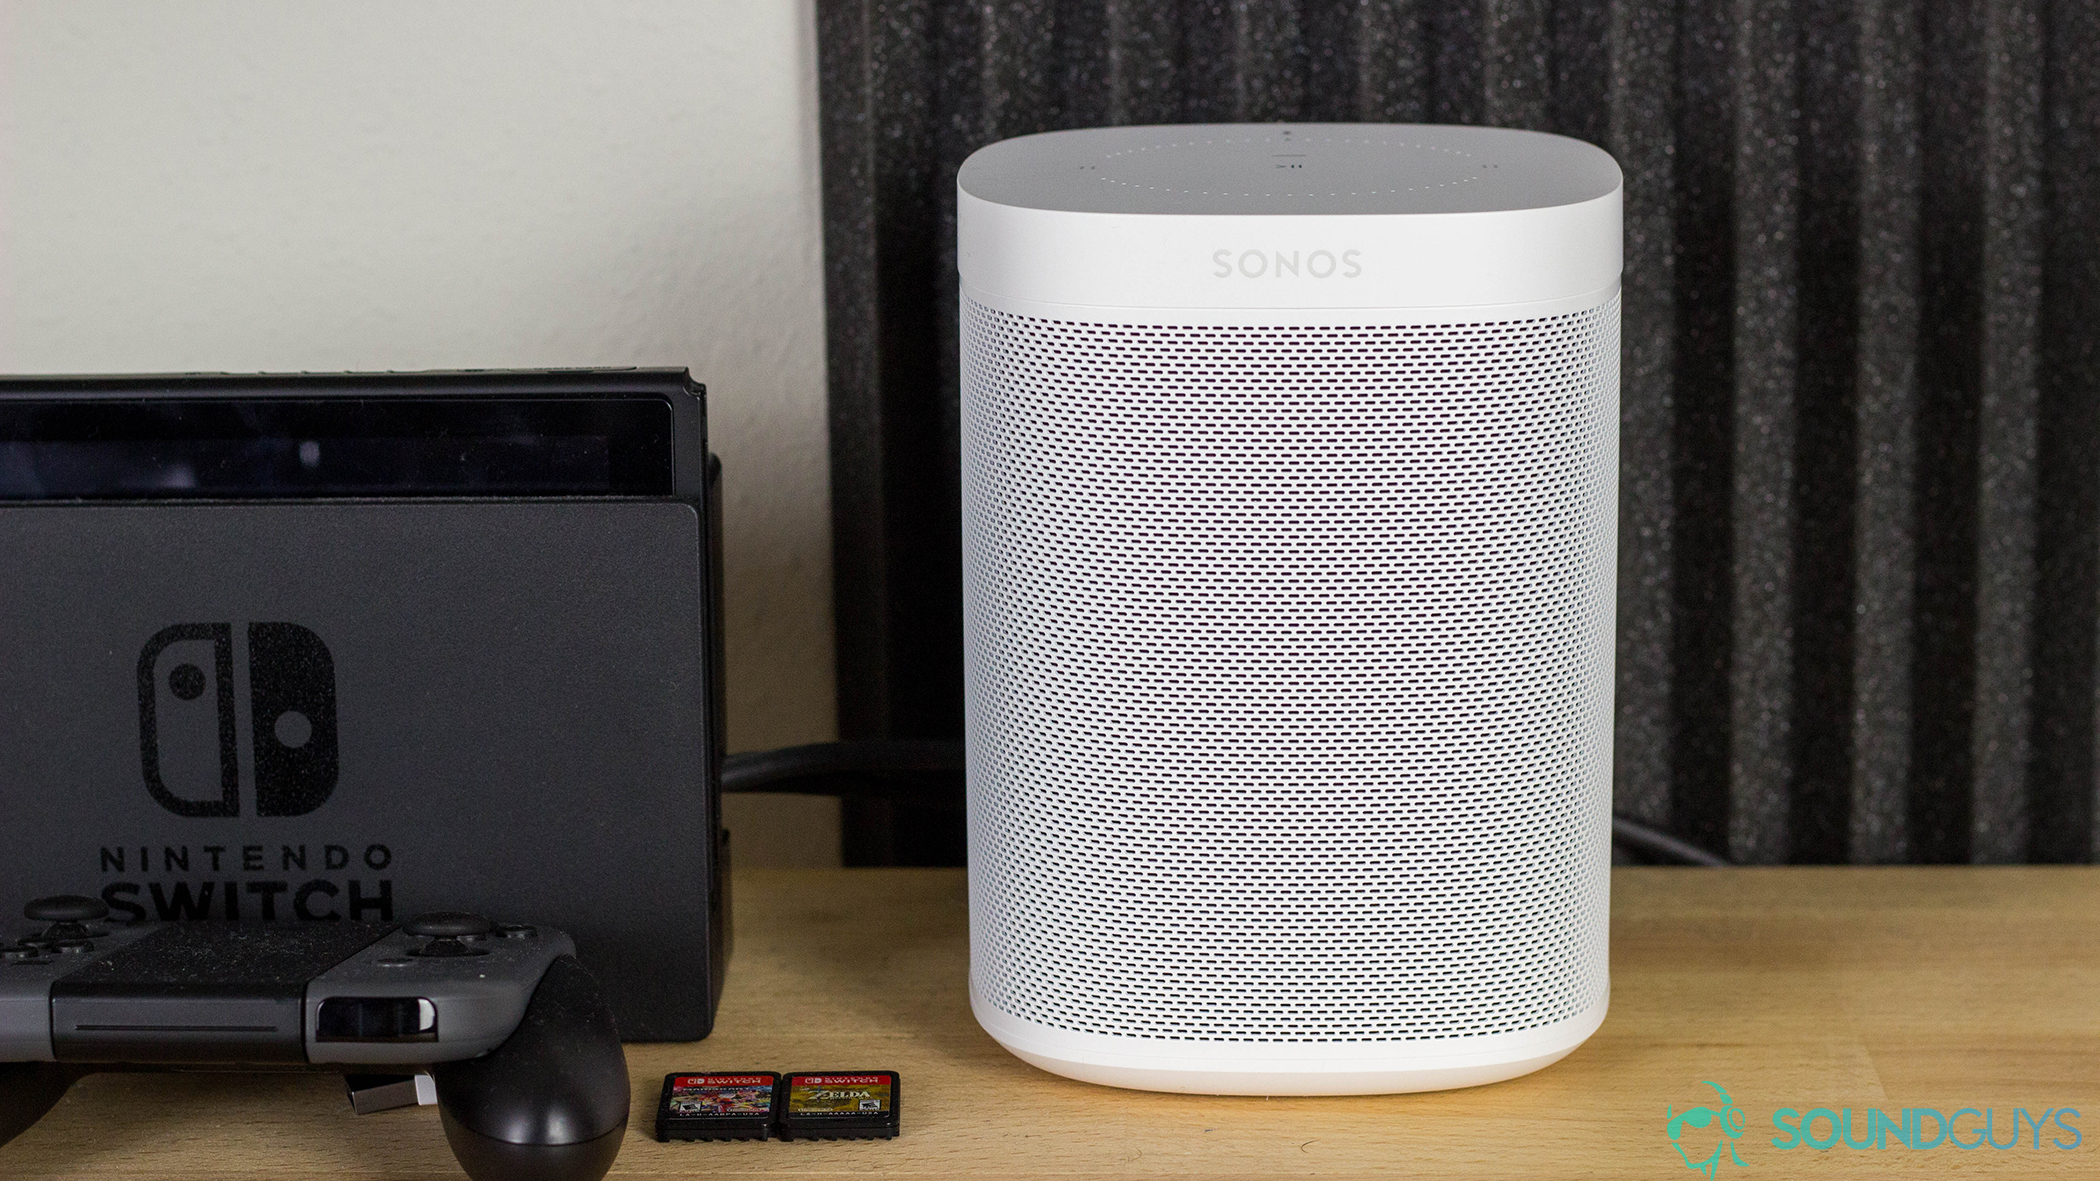 Solis SO-7000 review: The Sonos One on a wooden desk next to a Nintendo Switch.